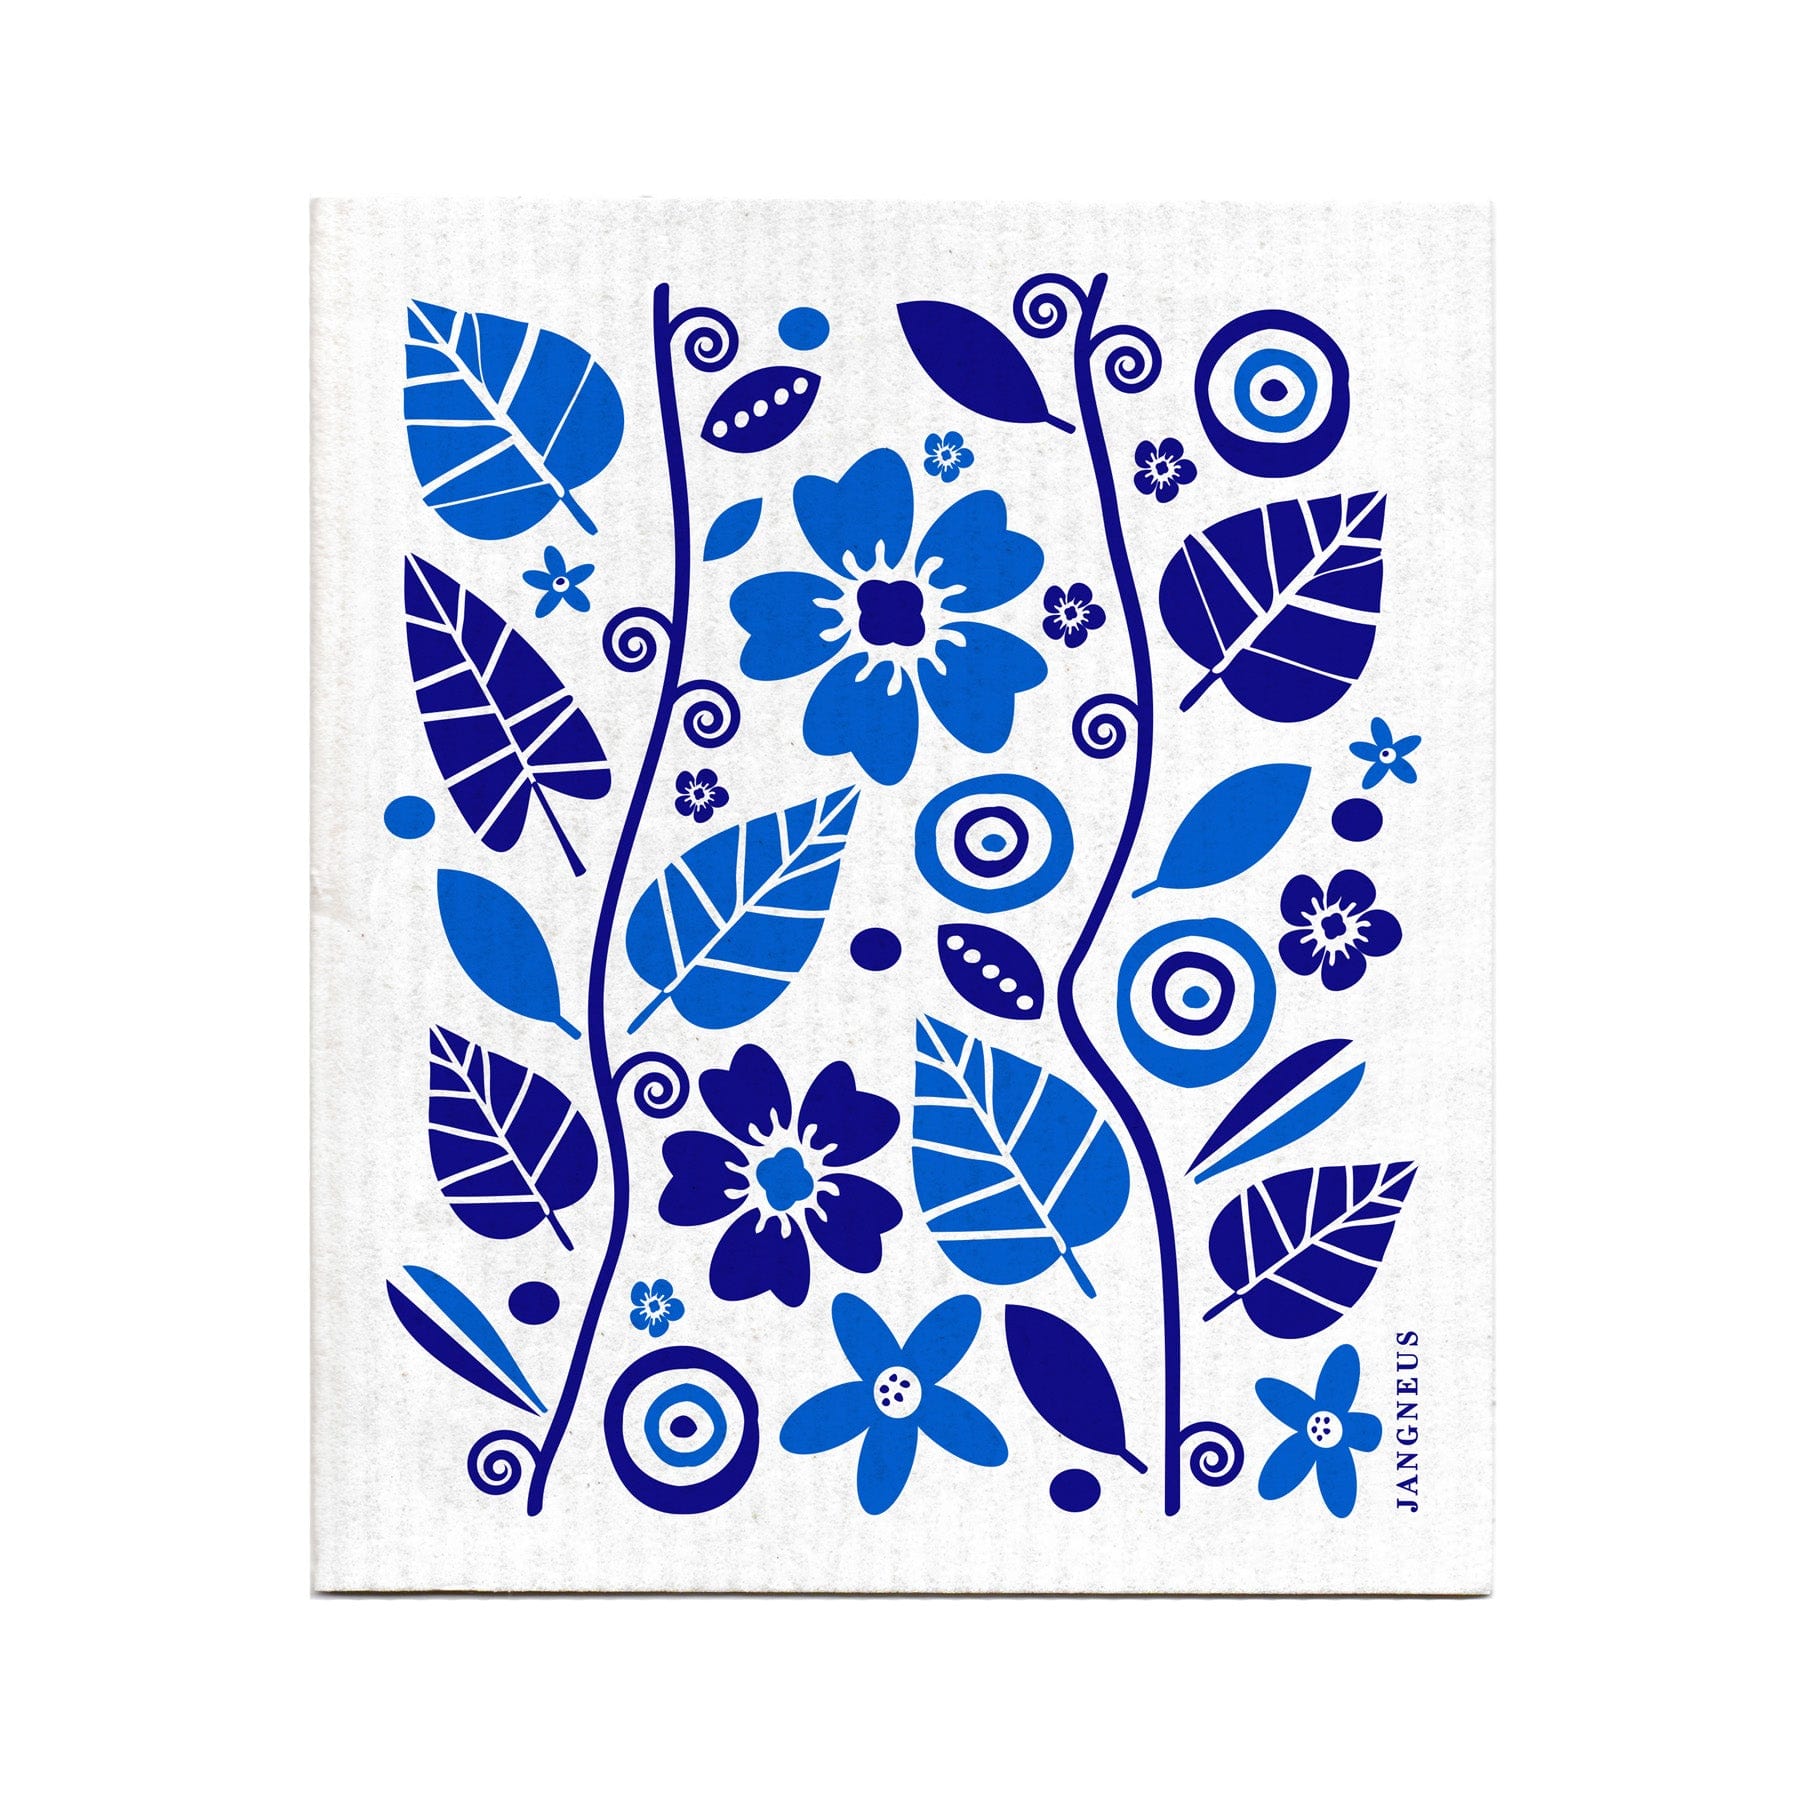 Blue and white floral pattern on fabric, decorative botanical illustration, nature-inspired textile design, artistic foliage and flowers print, vibrant blue leaves and blossoms on white background.